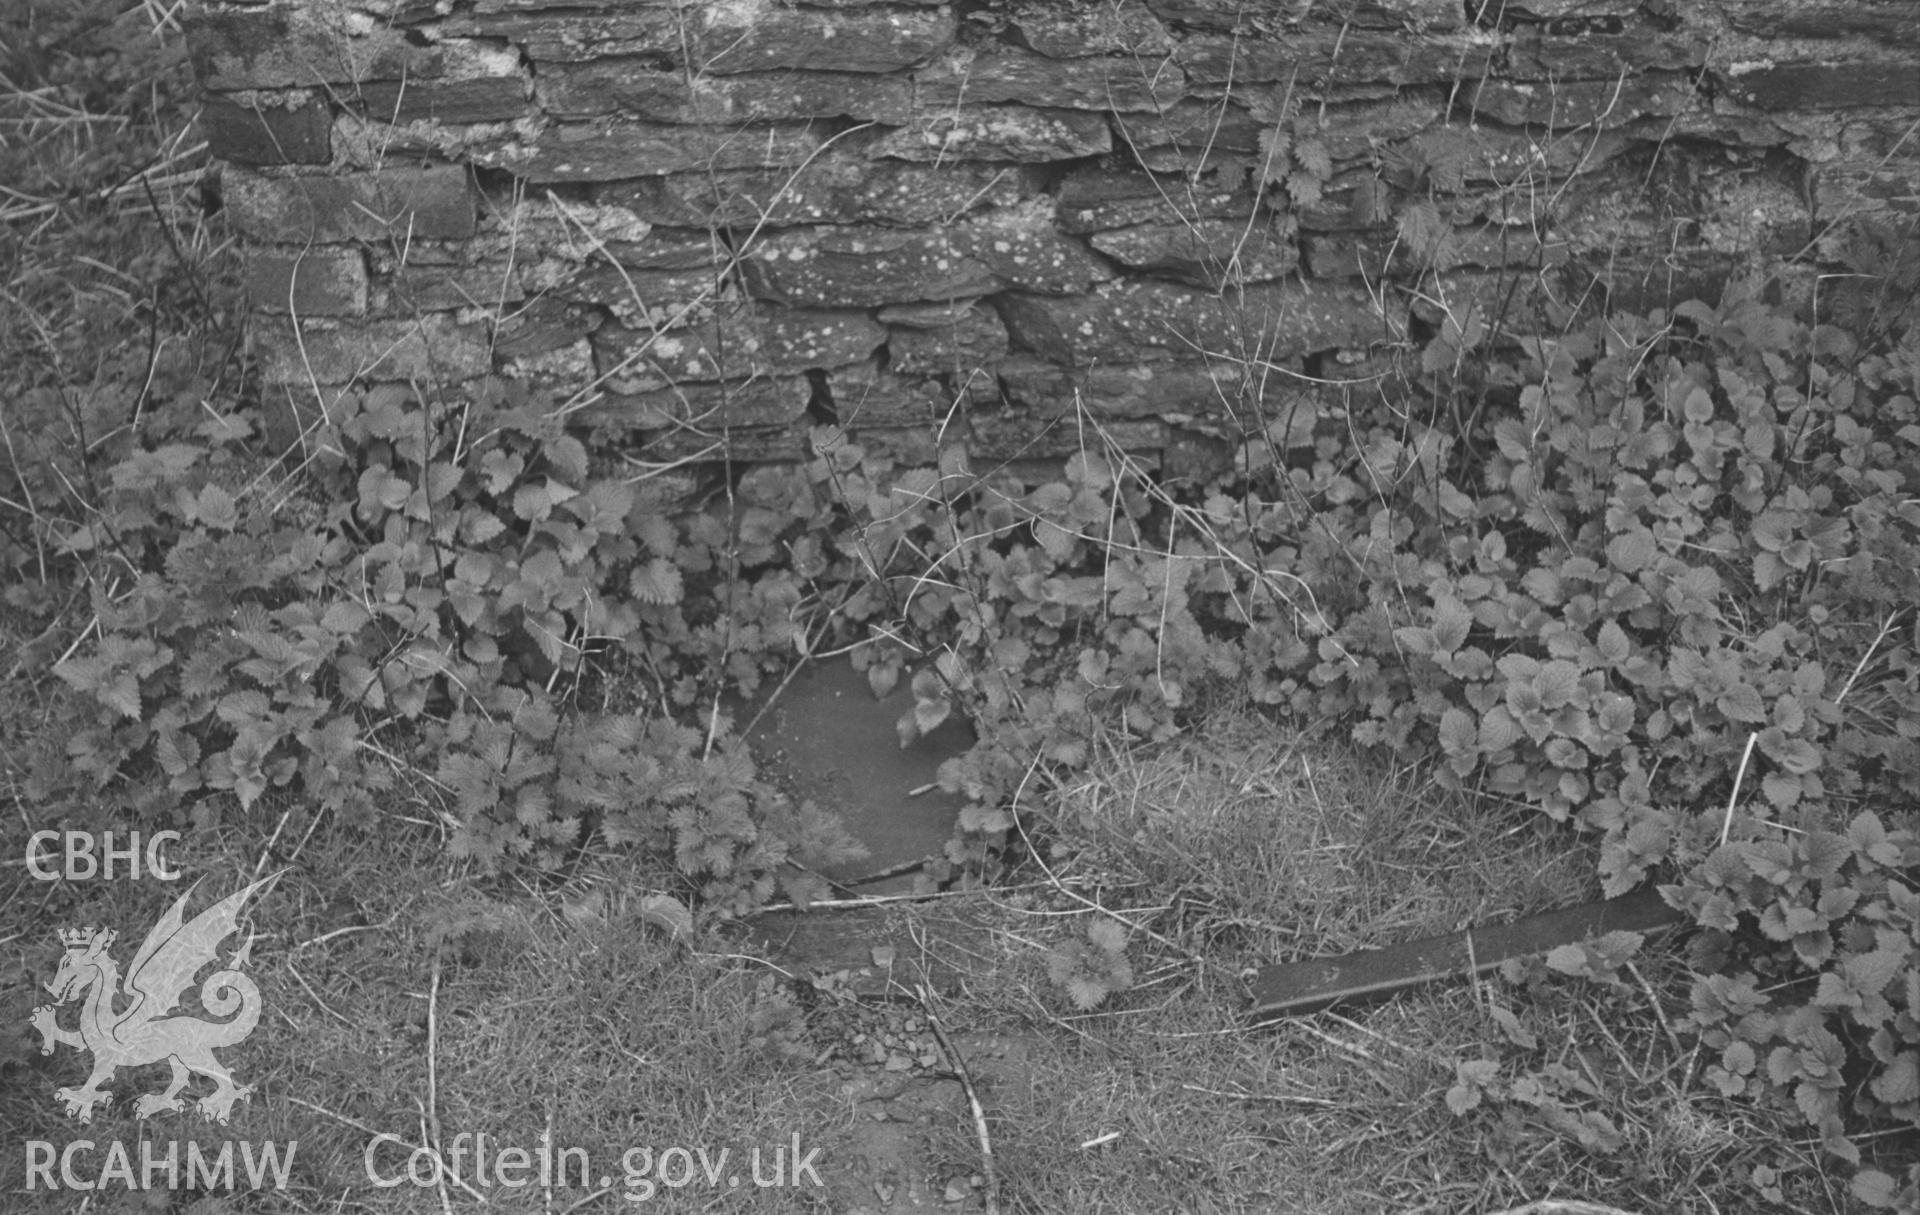 Black and White photograph showing Larnium in yard at back of Hafod Uchtryd, near the stable buildings. Photographed by Arthur Chater in March 1961 from Grid Reference SN 759 733.